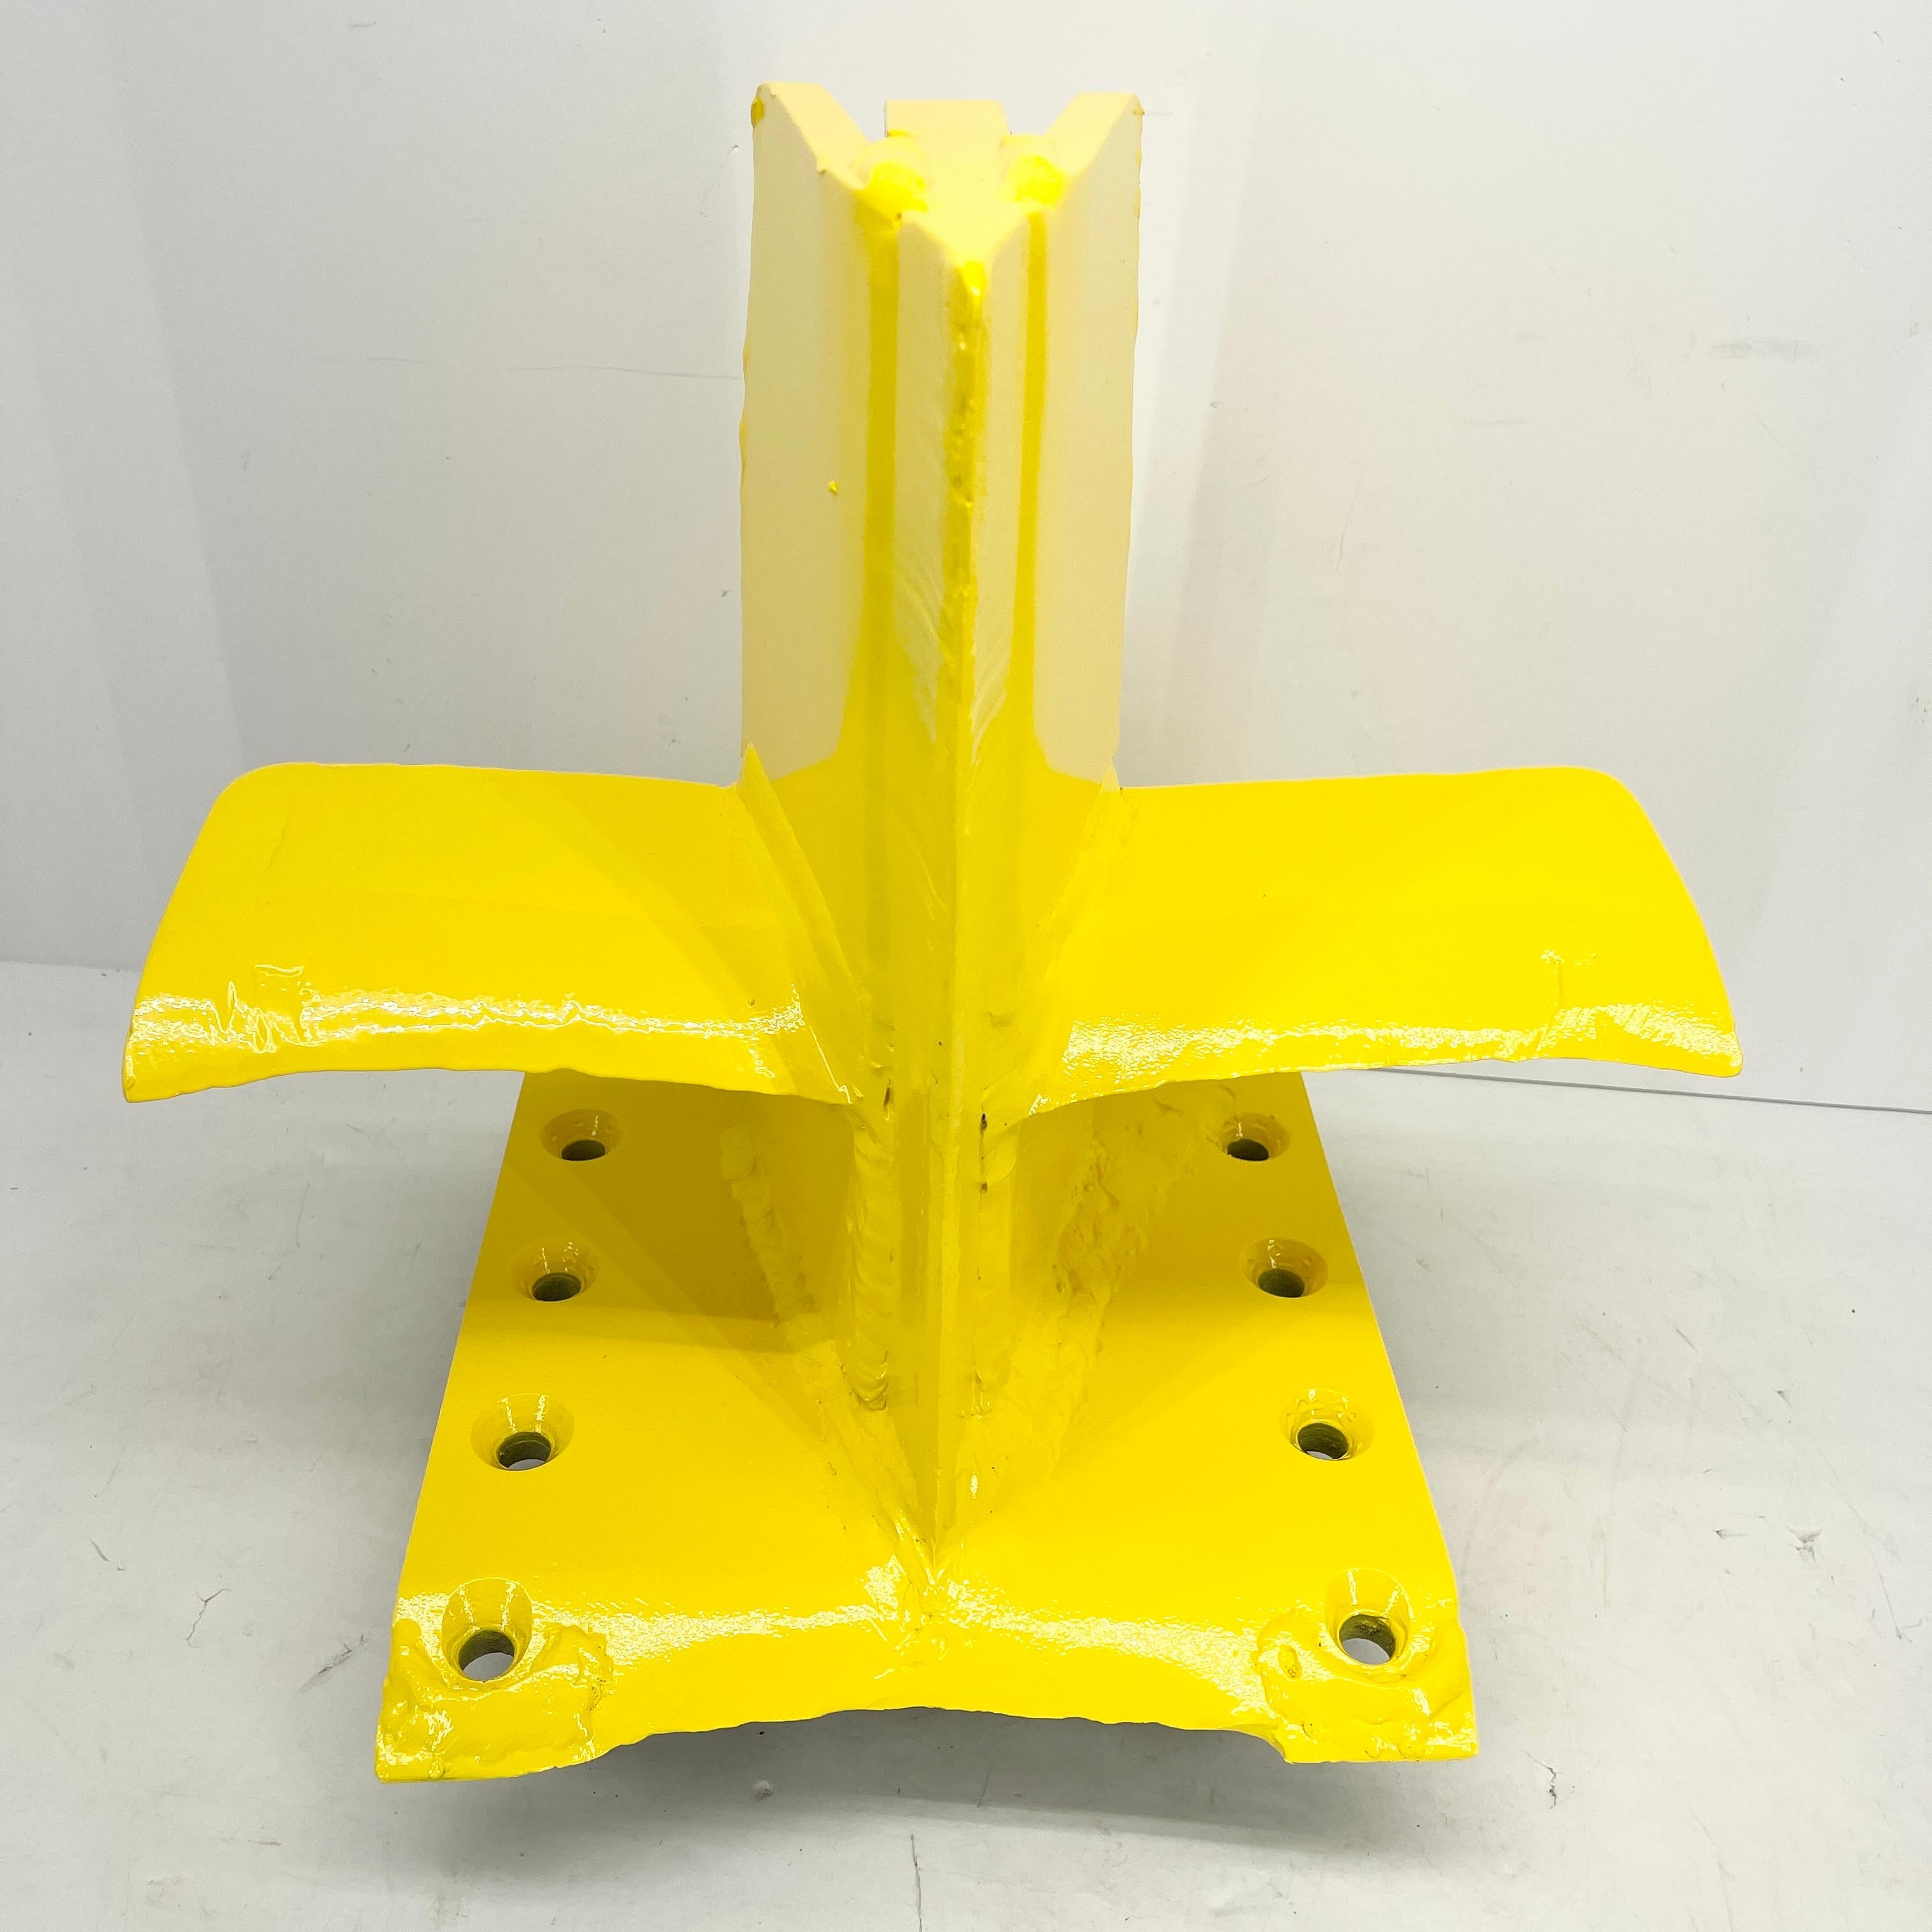 Bright Sunshine Yellow Abstract Eagle Head Sculpture From a 3 Way Wood Splitter In Good Condition For Sale In Haddonfield, NJ